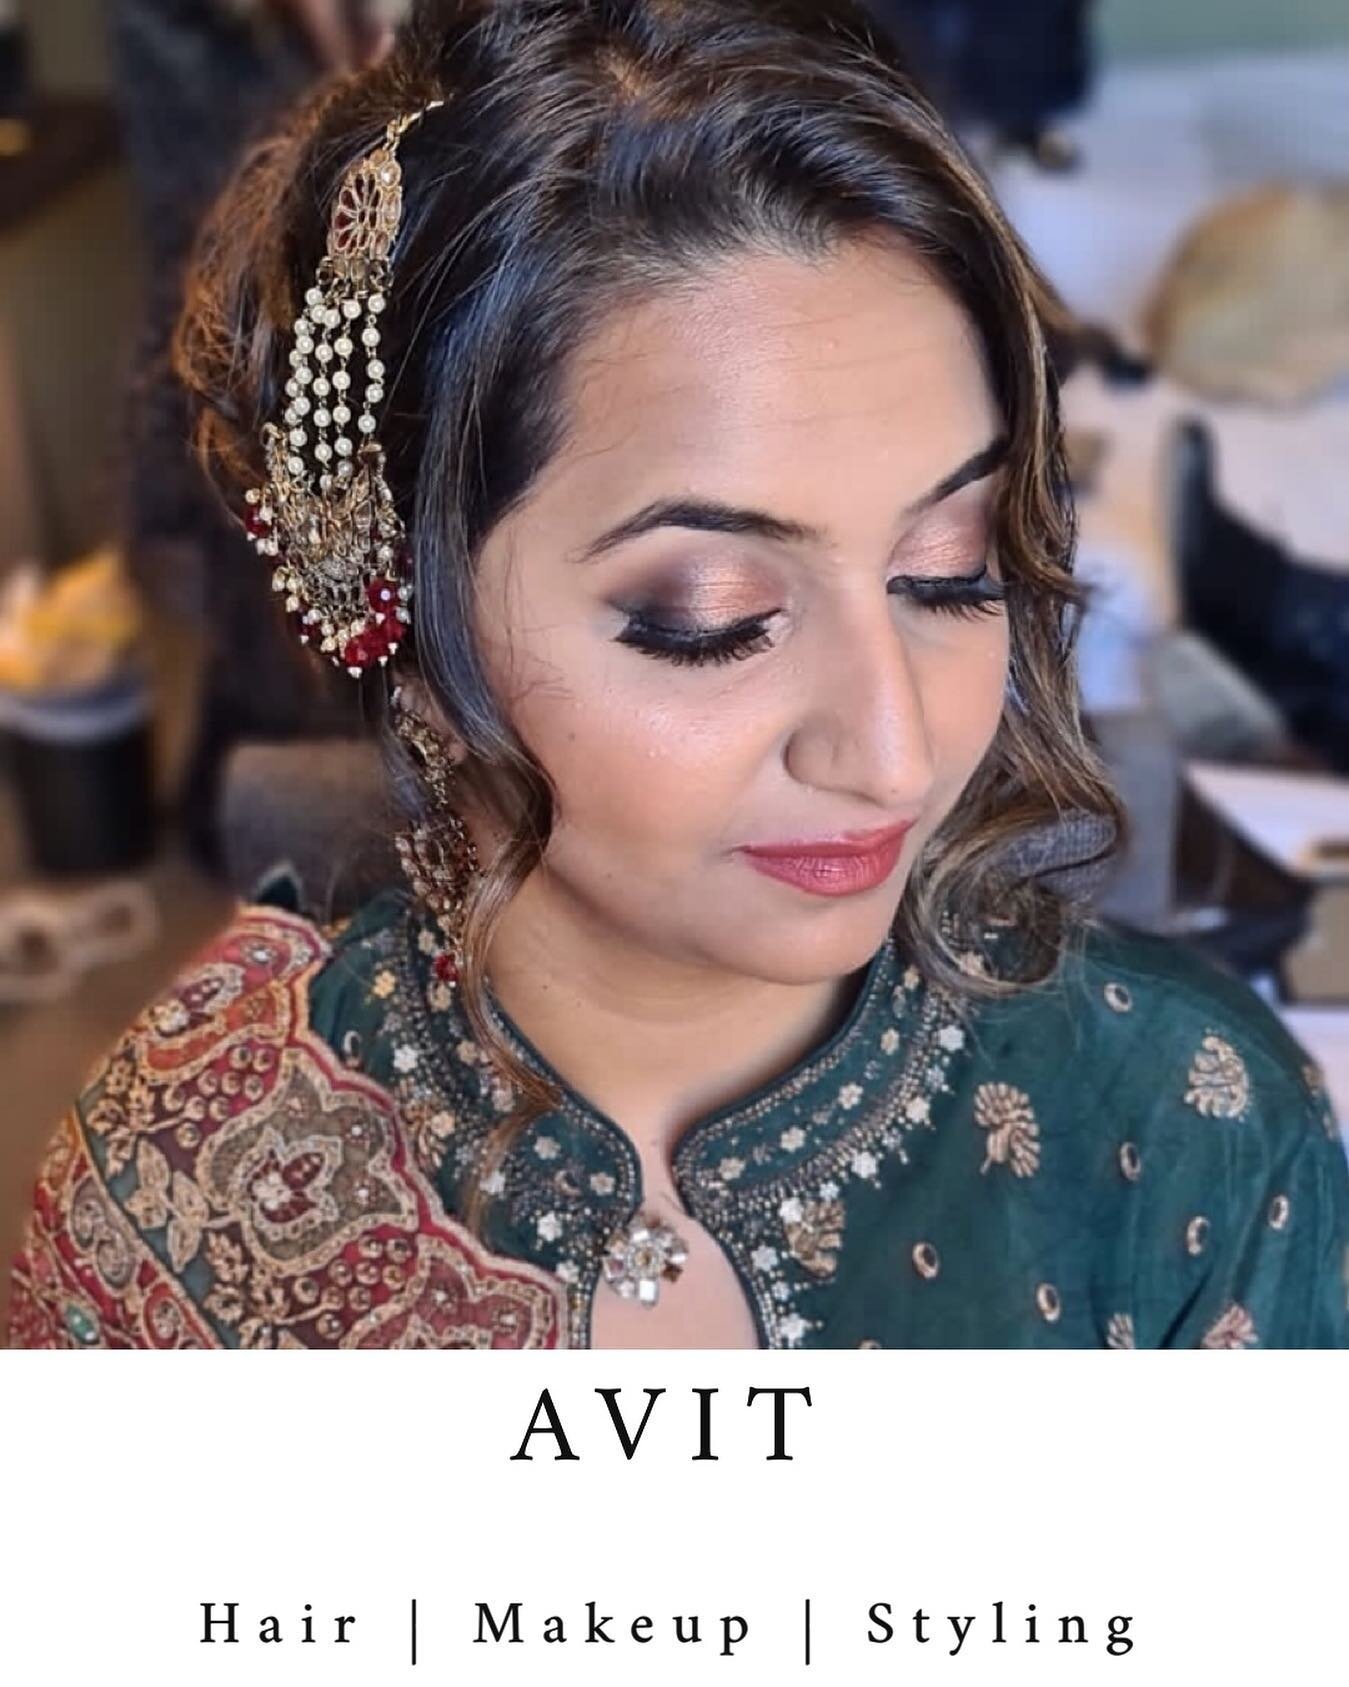 💄Stylist: AVIT
📍Location: W. LONDON - available to travel ----------------------------------------------------------------------------------
To BOOK 👉🏽 Email us at promakeuplondonstylists@gmail.com ------------------------------------------------